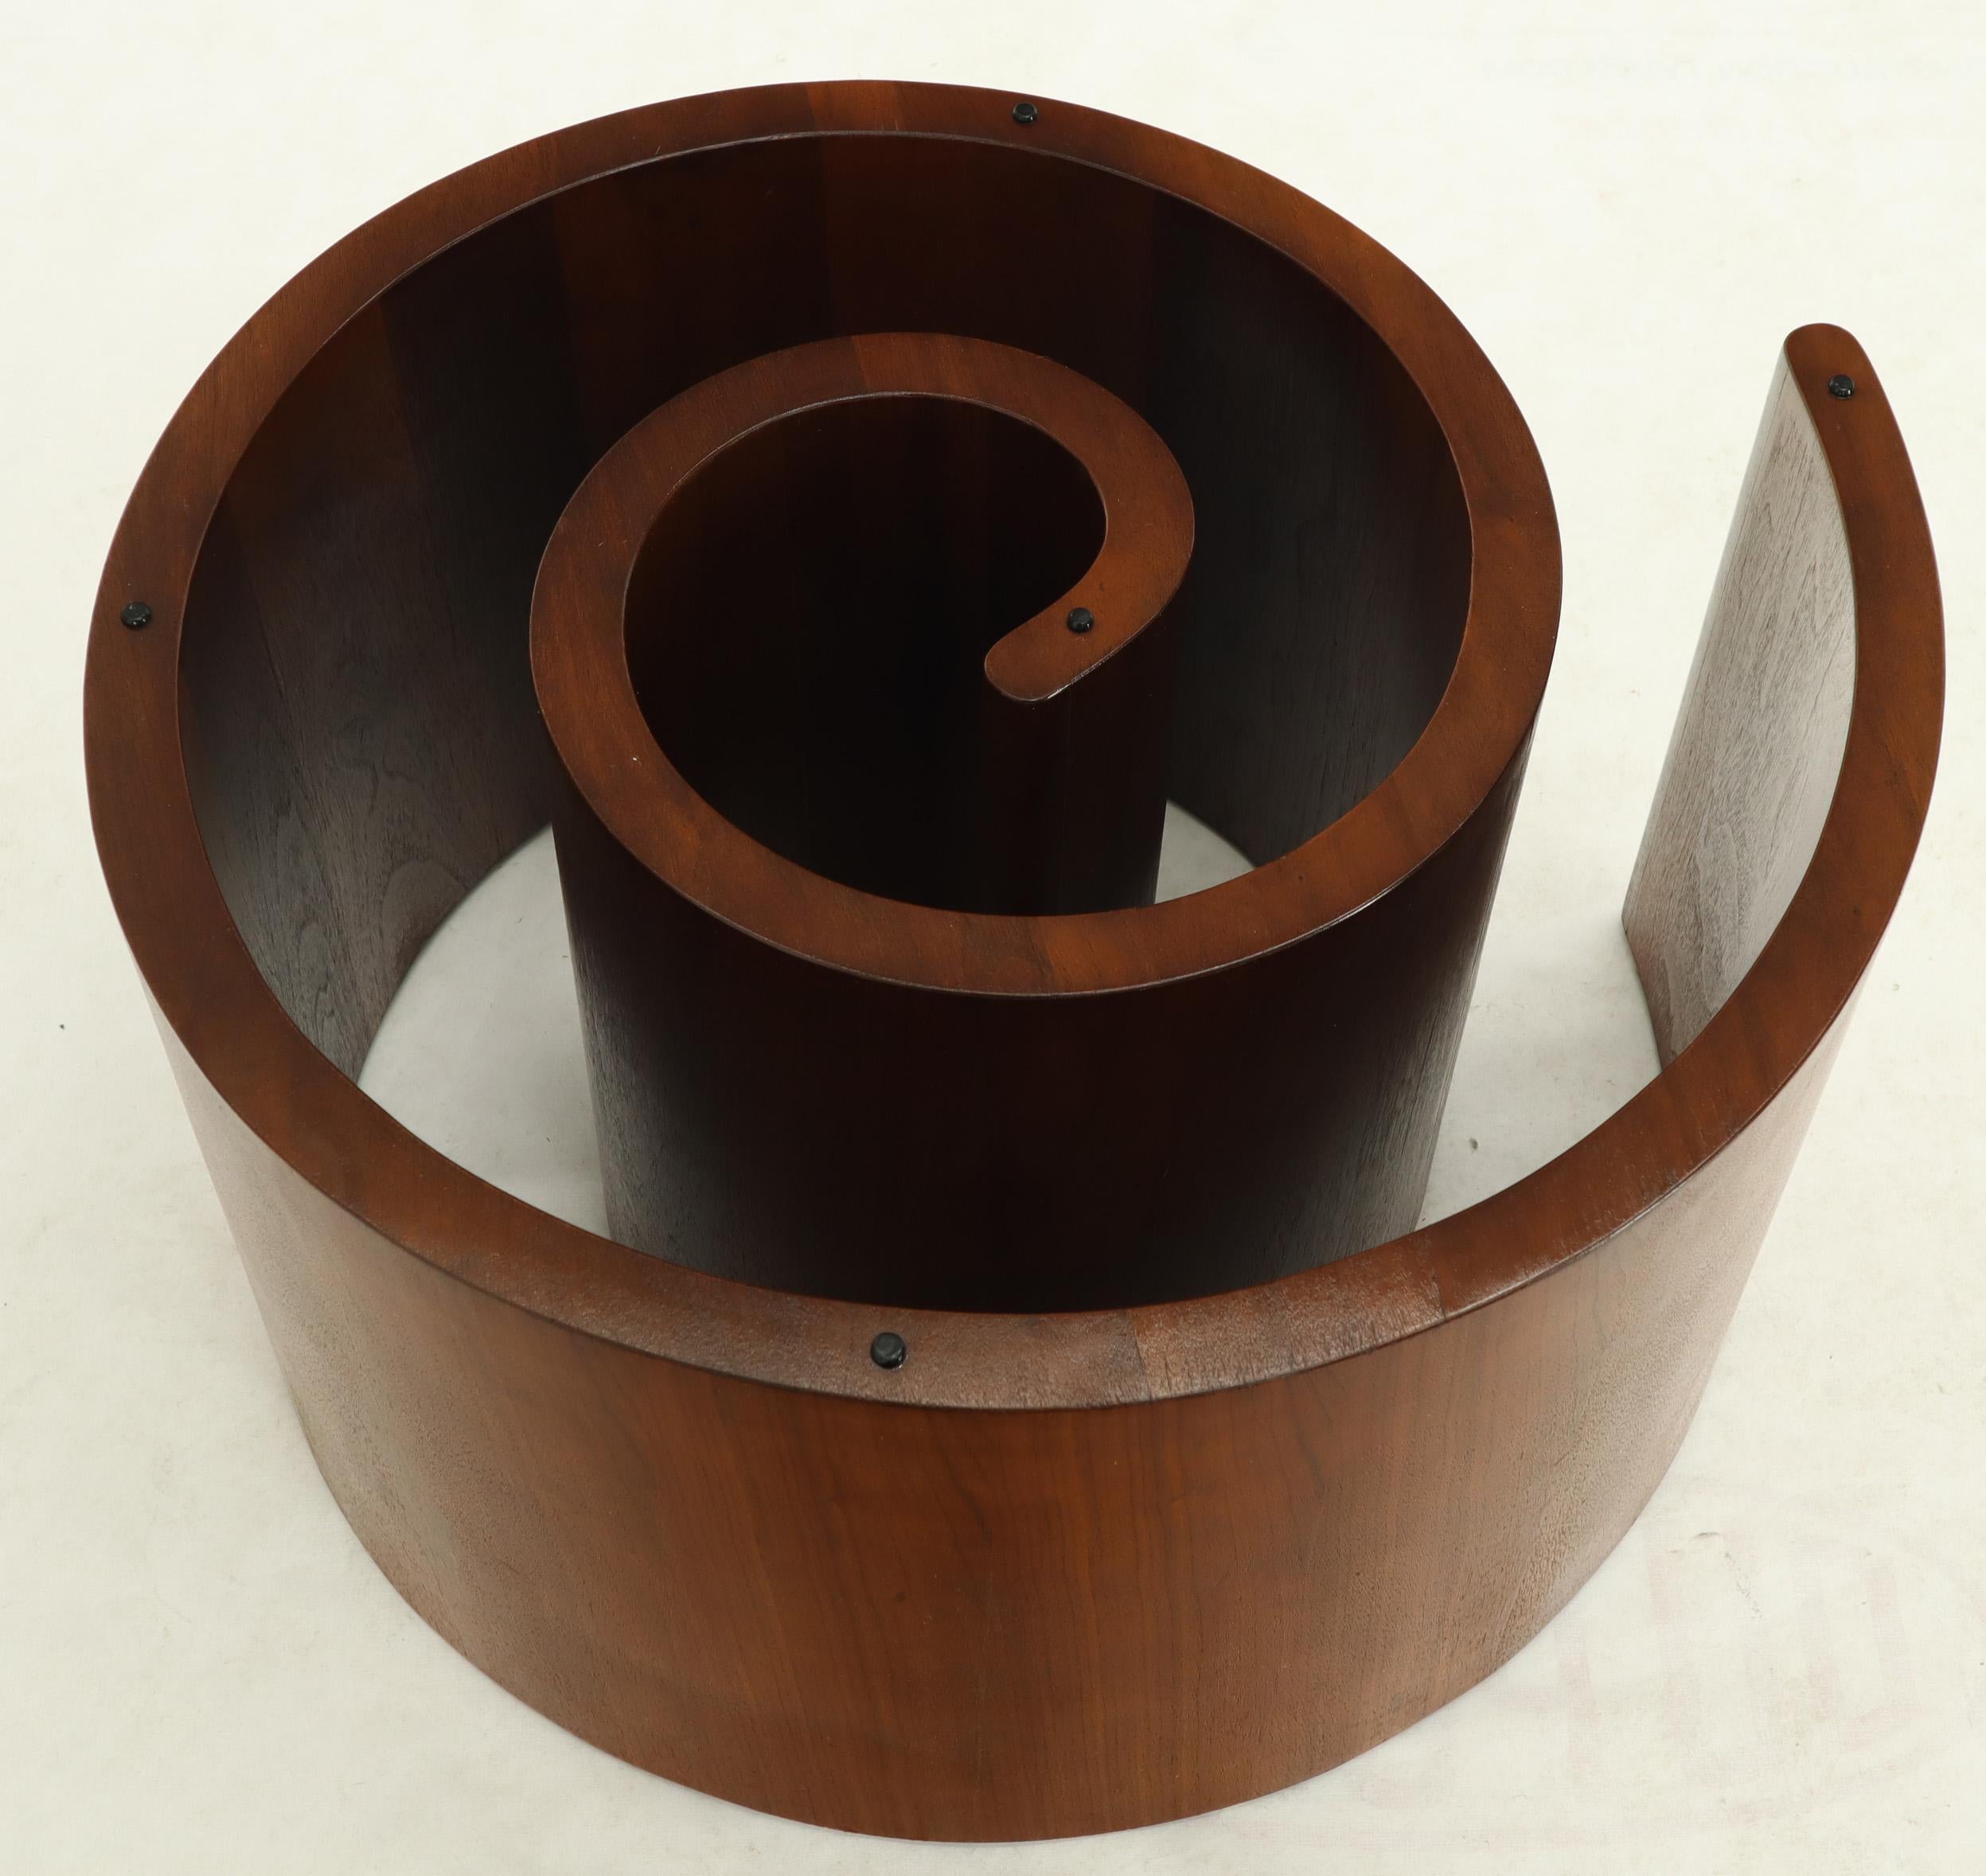 Mid-Century Modern Snail table by Vladimir Kagan. Beautiful walnut grain and color. Rare super clean example.